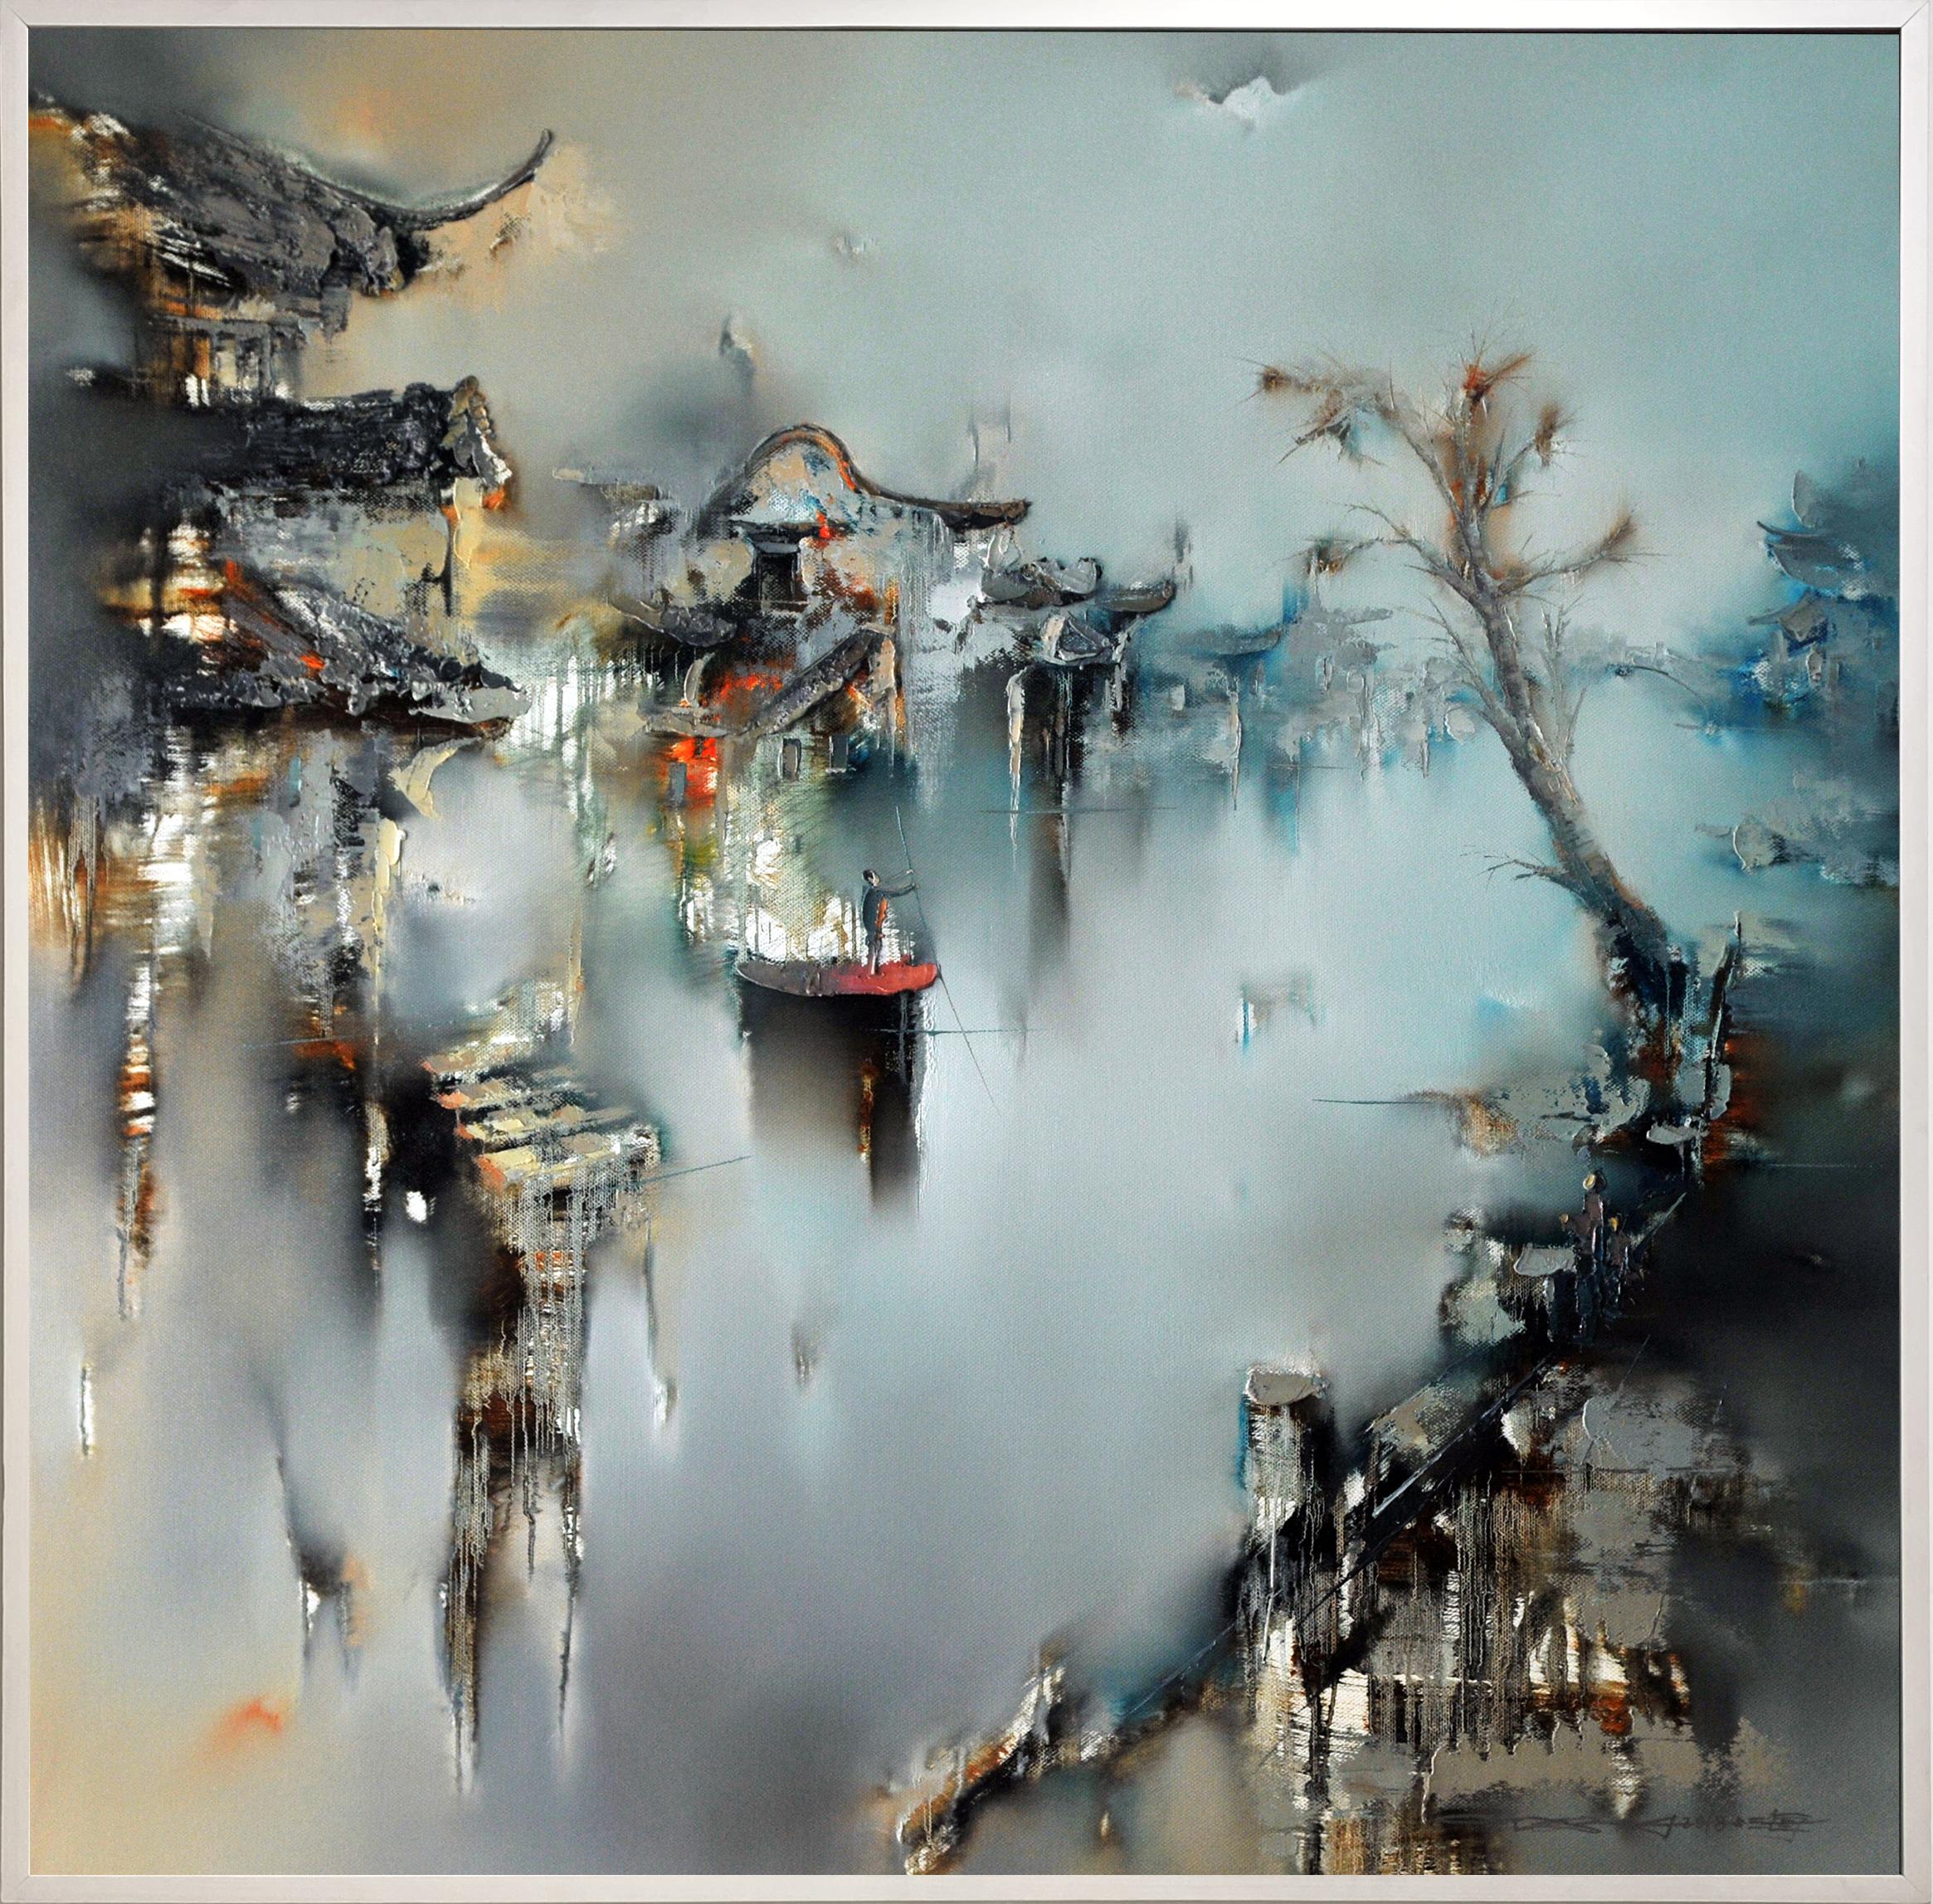 Gao Xiao Yun Landscape Painting - Mellow Like Breeze, Waterfront Landscapes oil paint, Layers Rhythmic brushstroke